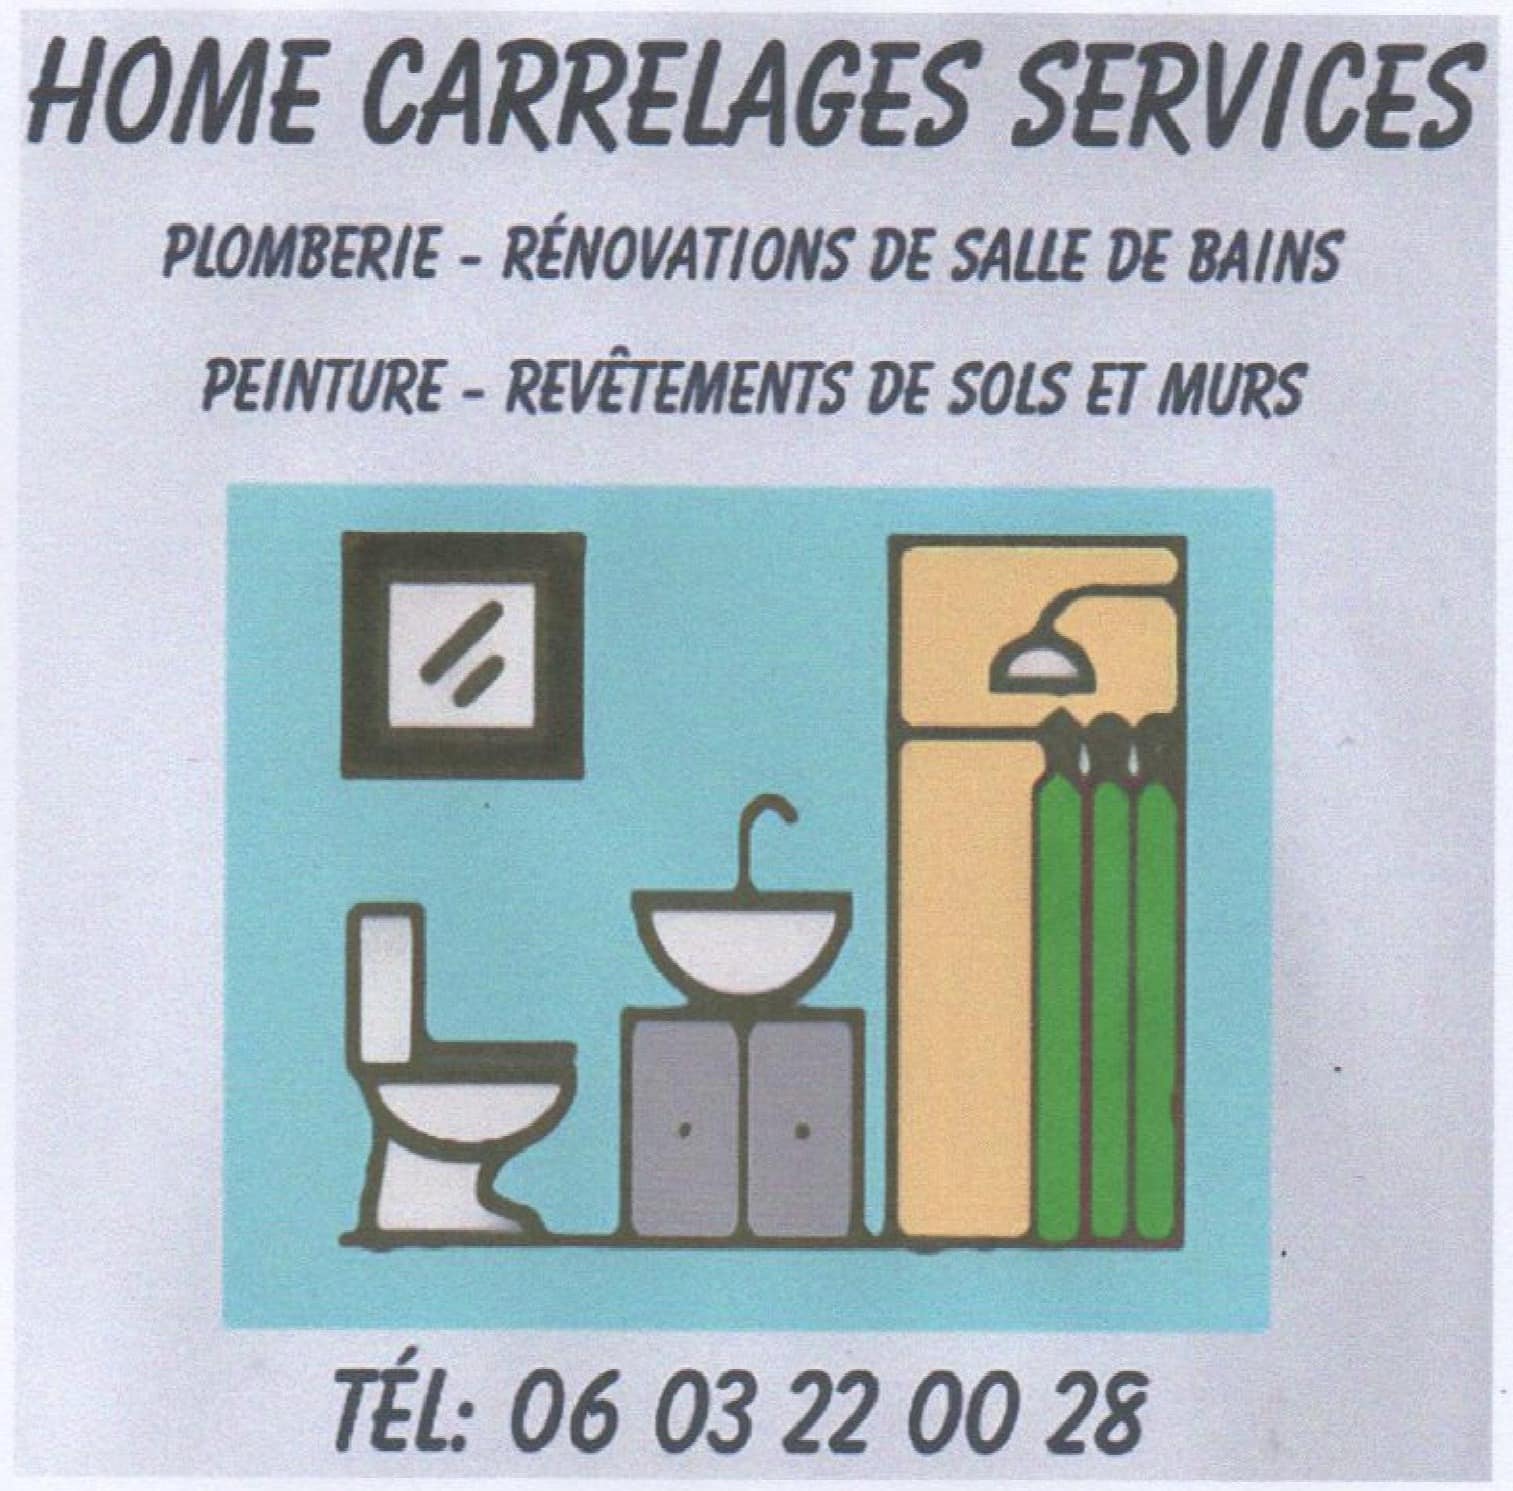 Home Carrelages Services